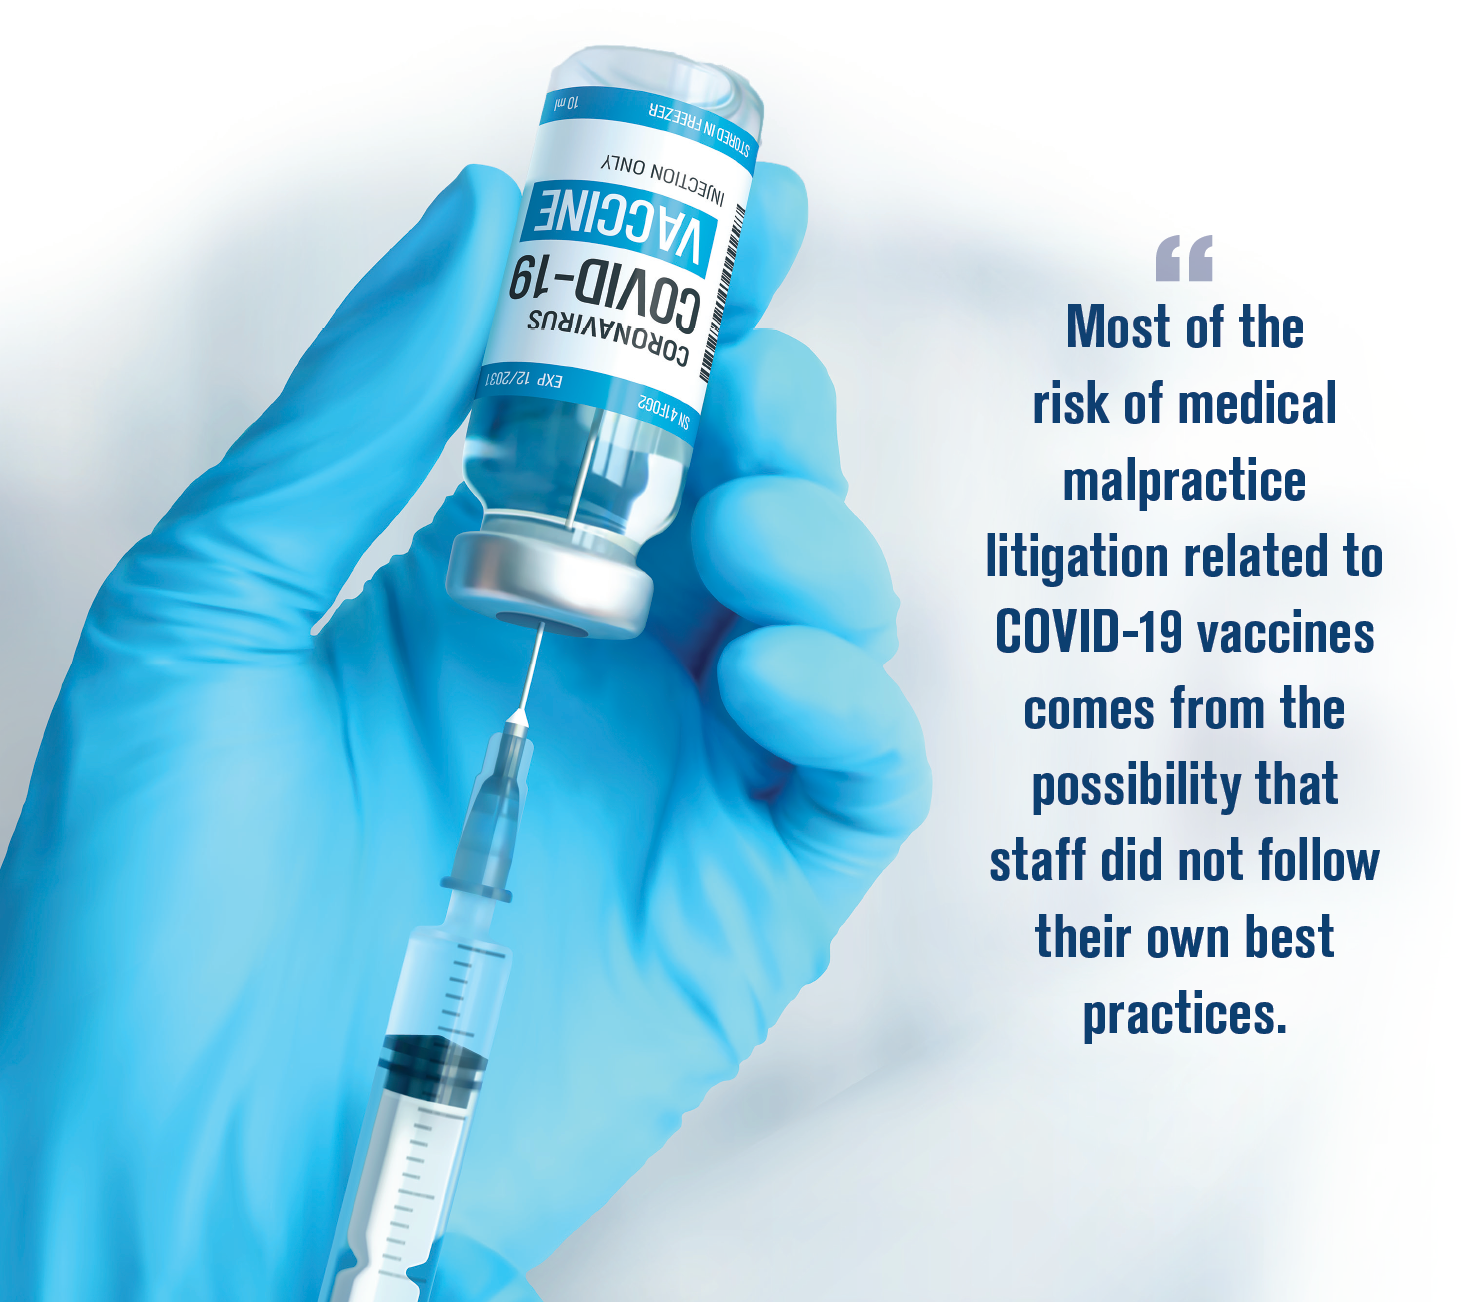 COVID-19 vaccines and medical liability: What physicians need to know